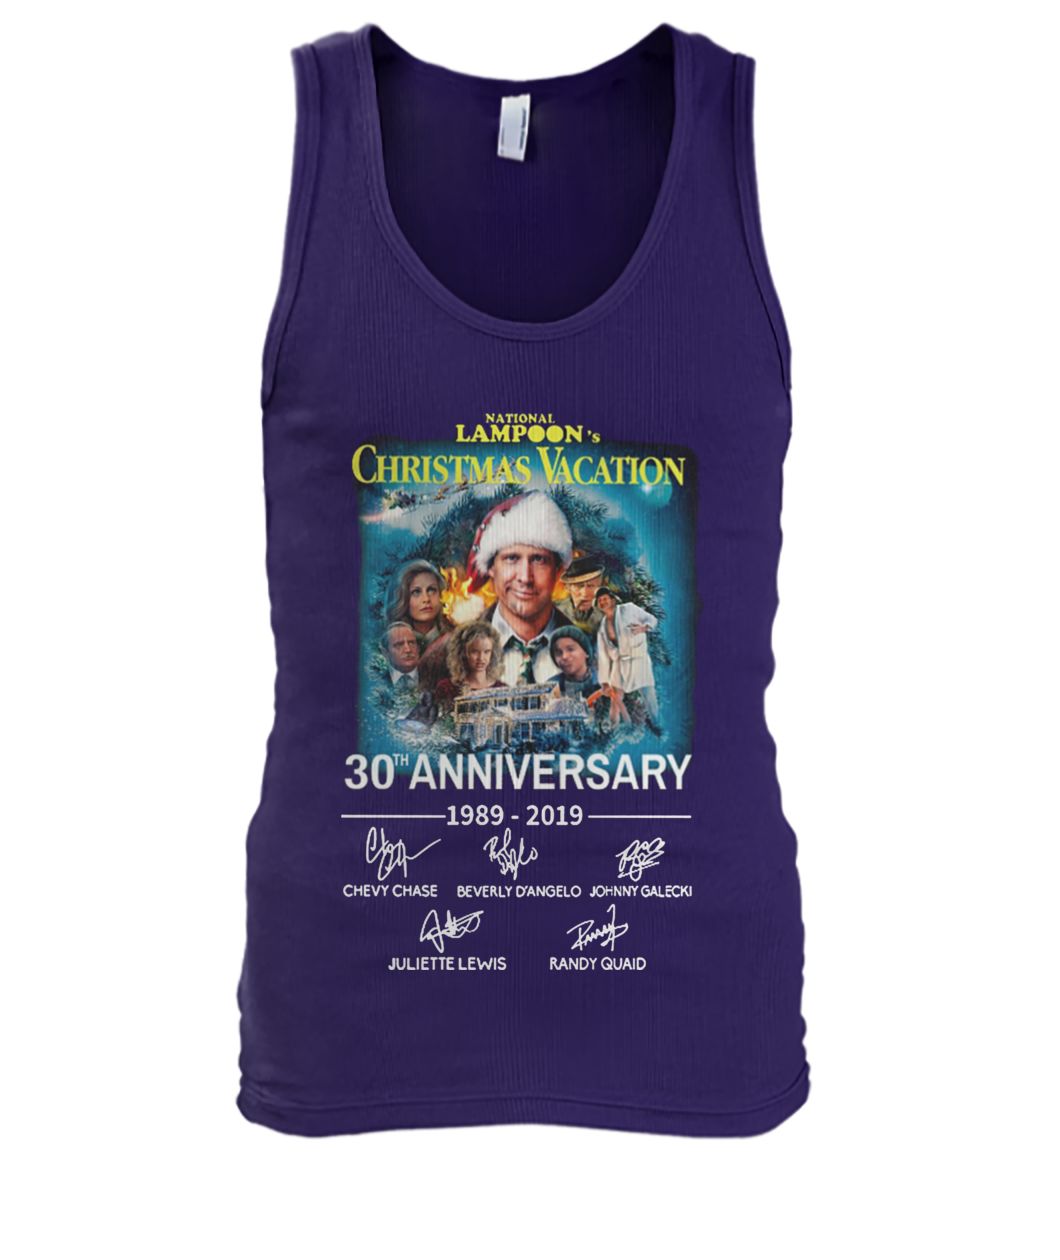 National lampoon's christmas vacation 30th anniversary 1989-2019 signatures men's tank top